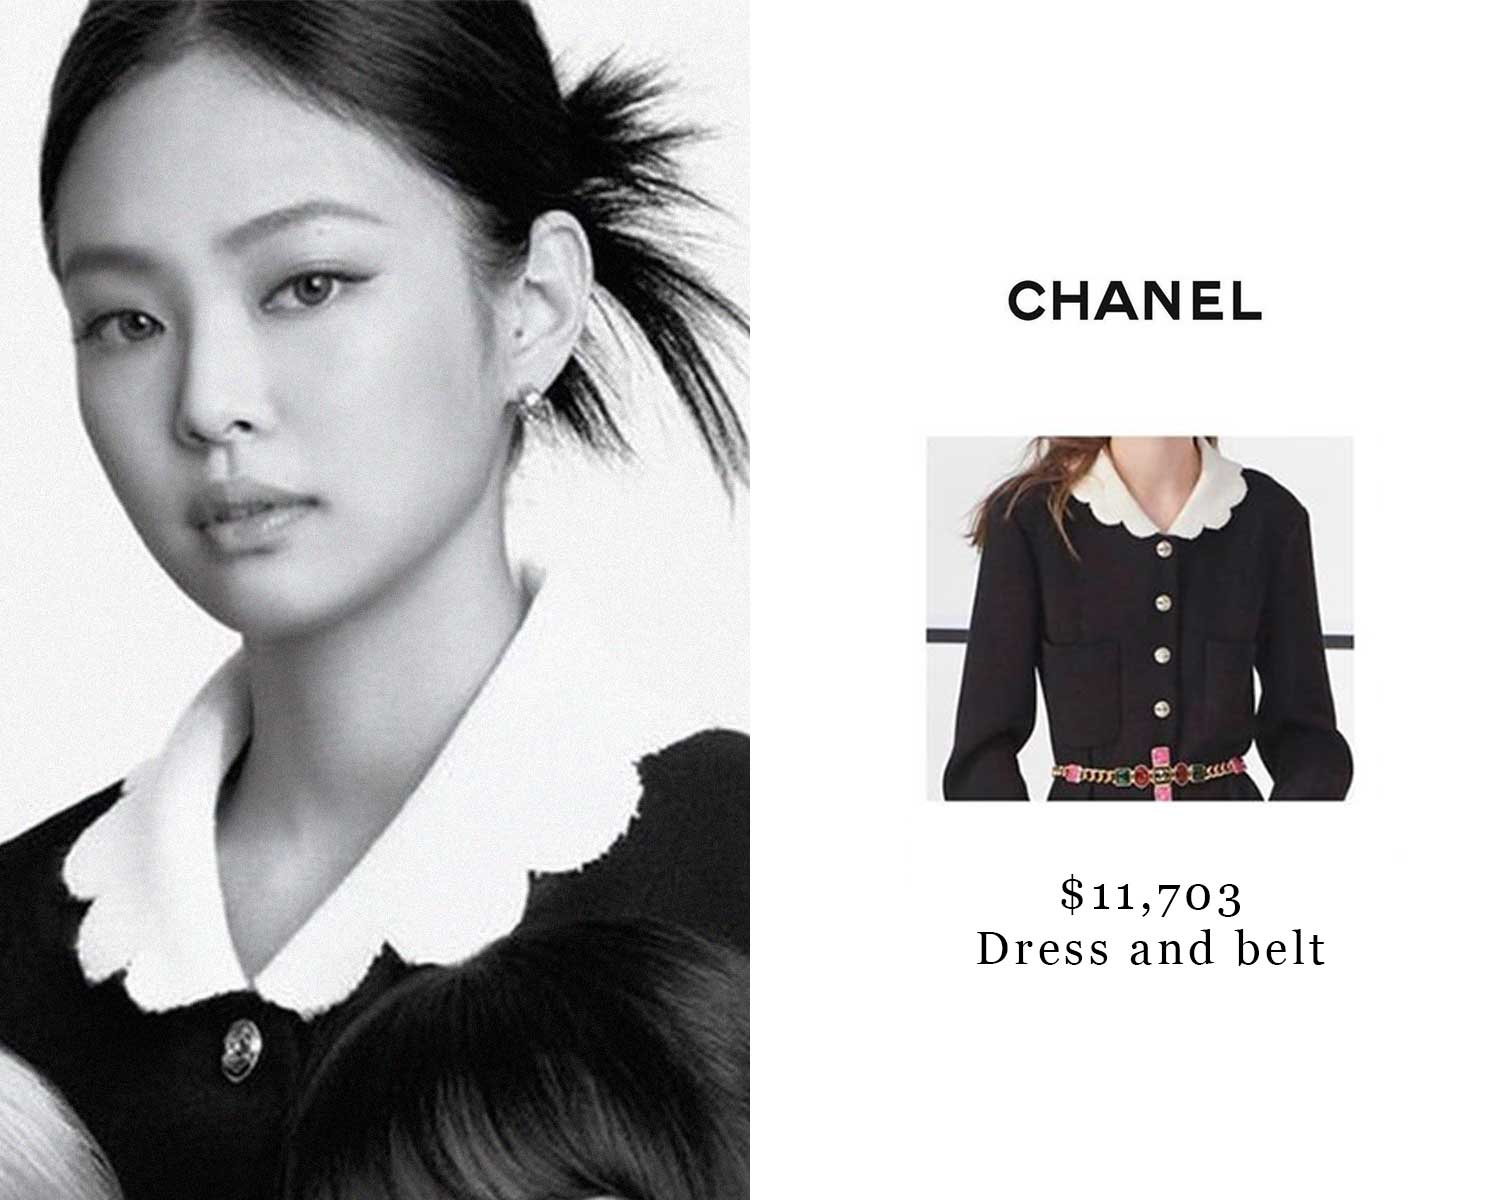 The 10 Most Expensive Chanel Pieces Jennie Kim Has Ever Worn